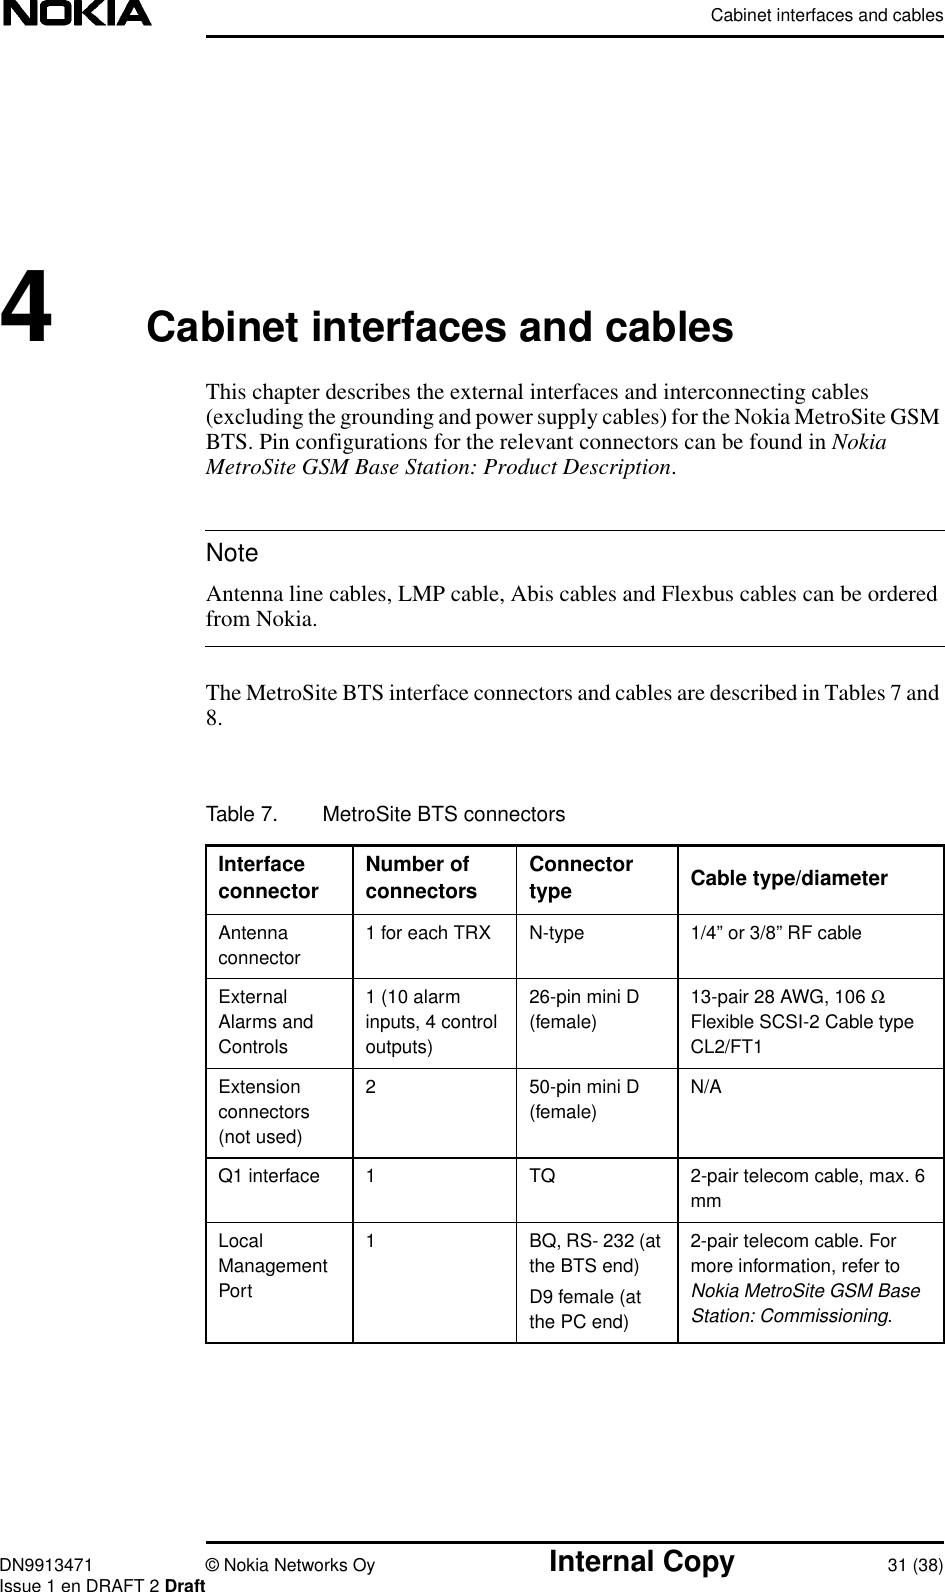 Cabinet interfaces and cablesDN9913471 © Nokia Networks Oy Internal Copy 31 (38)Issue 1 en DRAFT 2 DraftNote4Cabinet interfaces and cablesThis chapter describes the external interfaces and interconnecting cables(excluding the grounding and power supply cables) for the Nokia MetroSite GSMBTS. Pin configurations for the relevant connectors can be found in NokiaMetroSite GSM Base Station: Product Description.Antenna line cables, LMP cable, Abis cables and Flexbus cables can be orderedfrom Nokia.The MetroSite BTS interface connectors and cables are described in Tables 7 and8.Table 7. MetroSite BTS connectorsInterfaceconnectorNumber ofconnectorsConnectortype Cable type/diameterAntennaconnector1 for each TRX N-type 1/4” or 3/8” RF cableExternalAlarms andControls1 (10 alarminputs, 4 controloutputs)26-pin mini D(female)13-pair 28 AWG, 106 ΩFlexible SCSI-2 Cable typeCL2/FT1Extensionconnectors(not used)2 50-pin mini D(female)N/AQ1 interface 1 TQ 2-pair telecom cable, max. 6mmLocalManagementPort1 BQ, RS- 232 (atthe BTS end)D9 female (atthe PC end)2-pair telecom cable. Formore information, refer toNokia MetroSite GSM BaseStation: Commissioning.